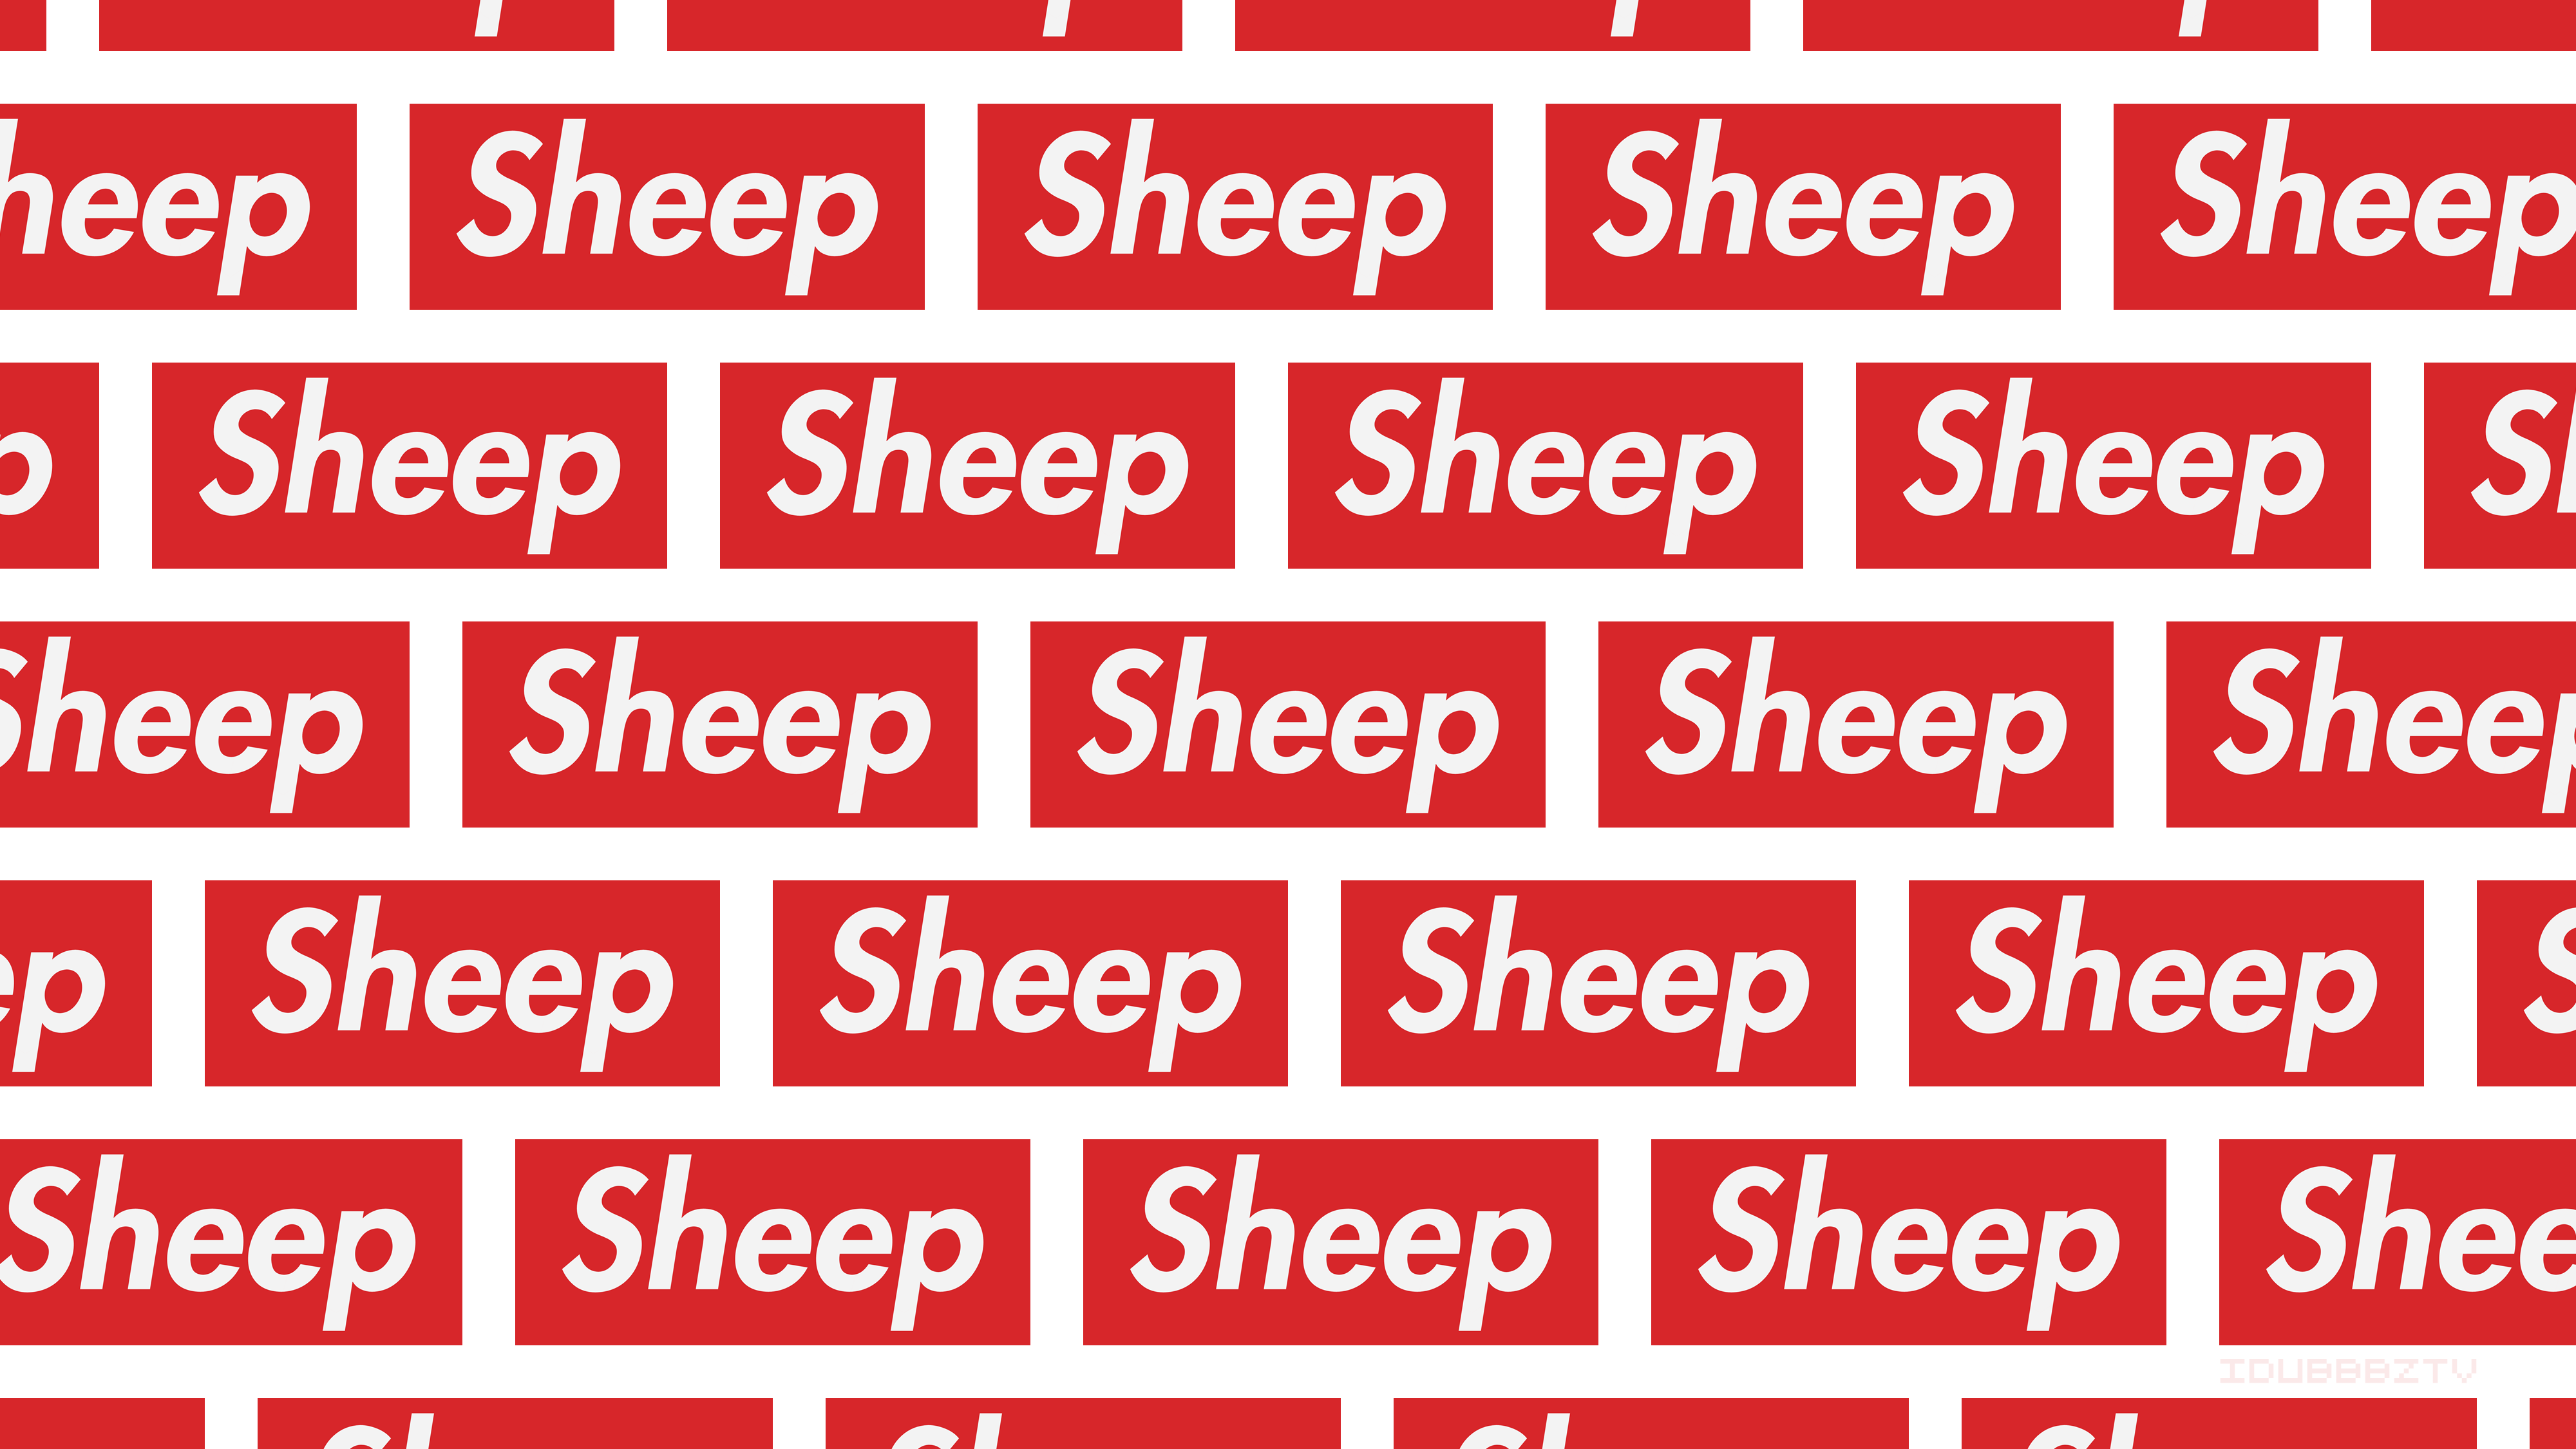 General 4000x2250 sheep humor red white